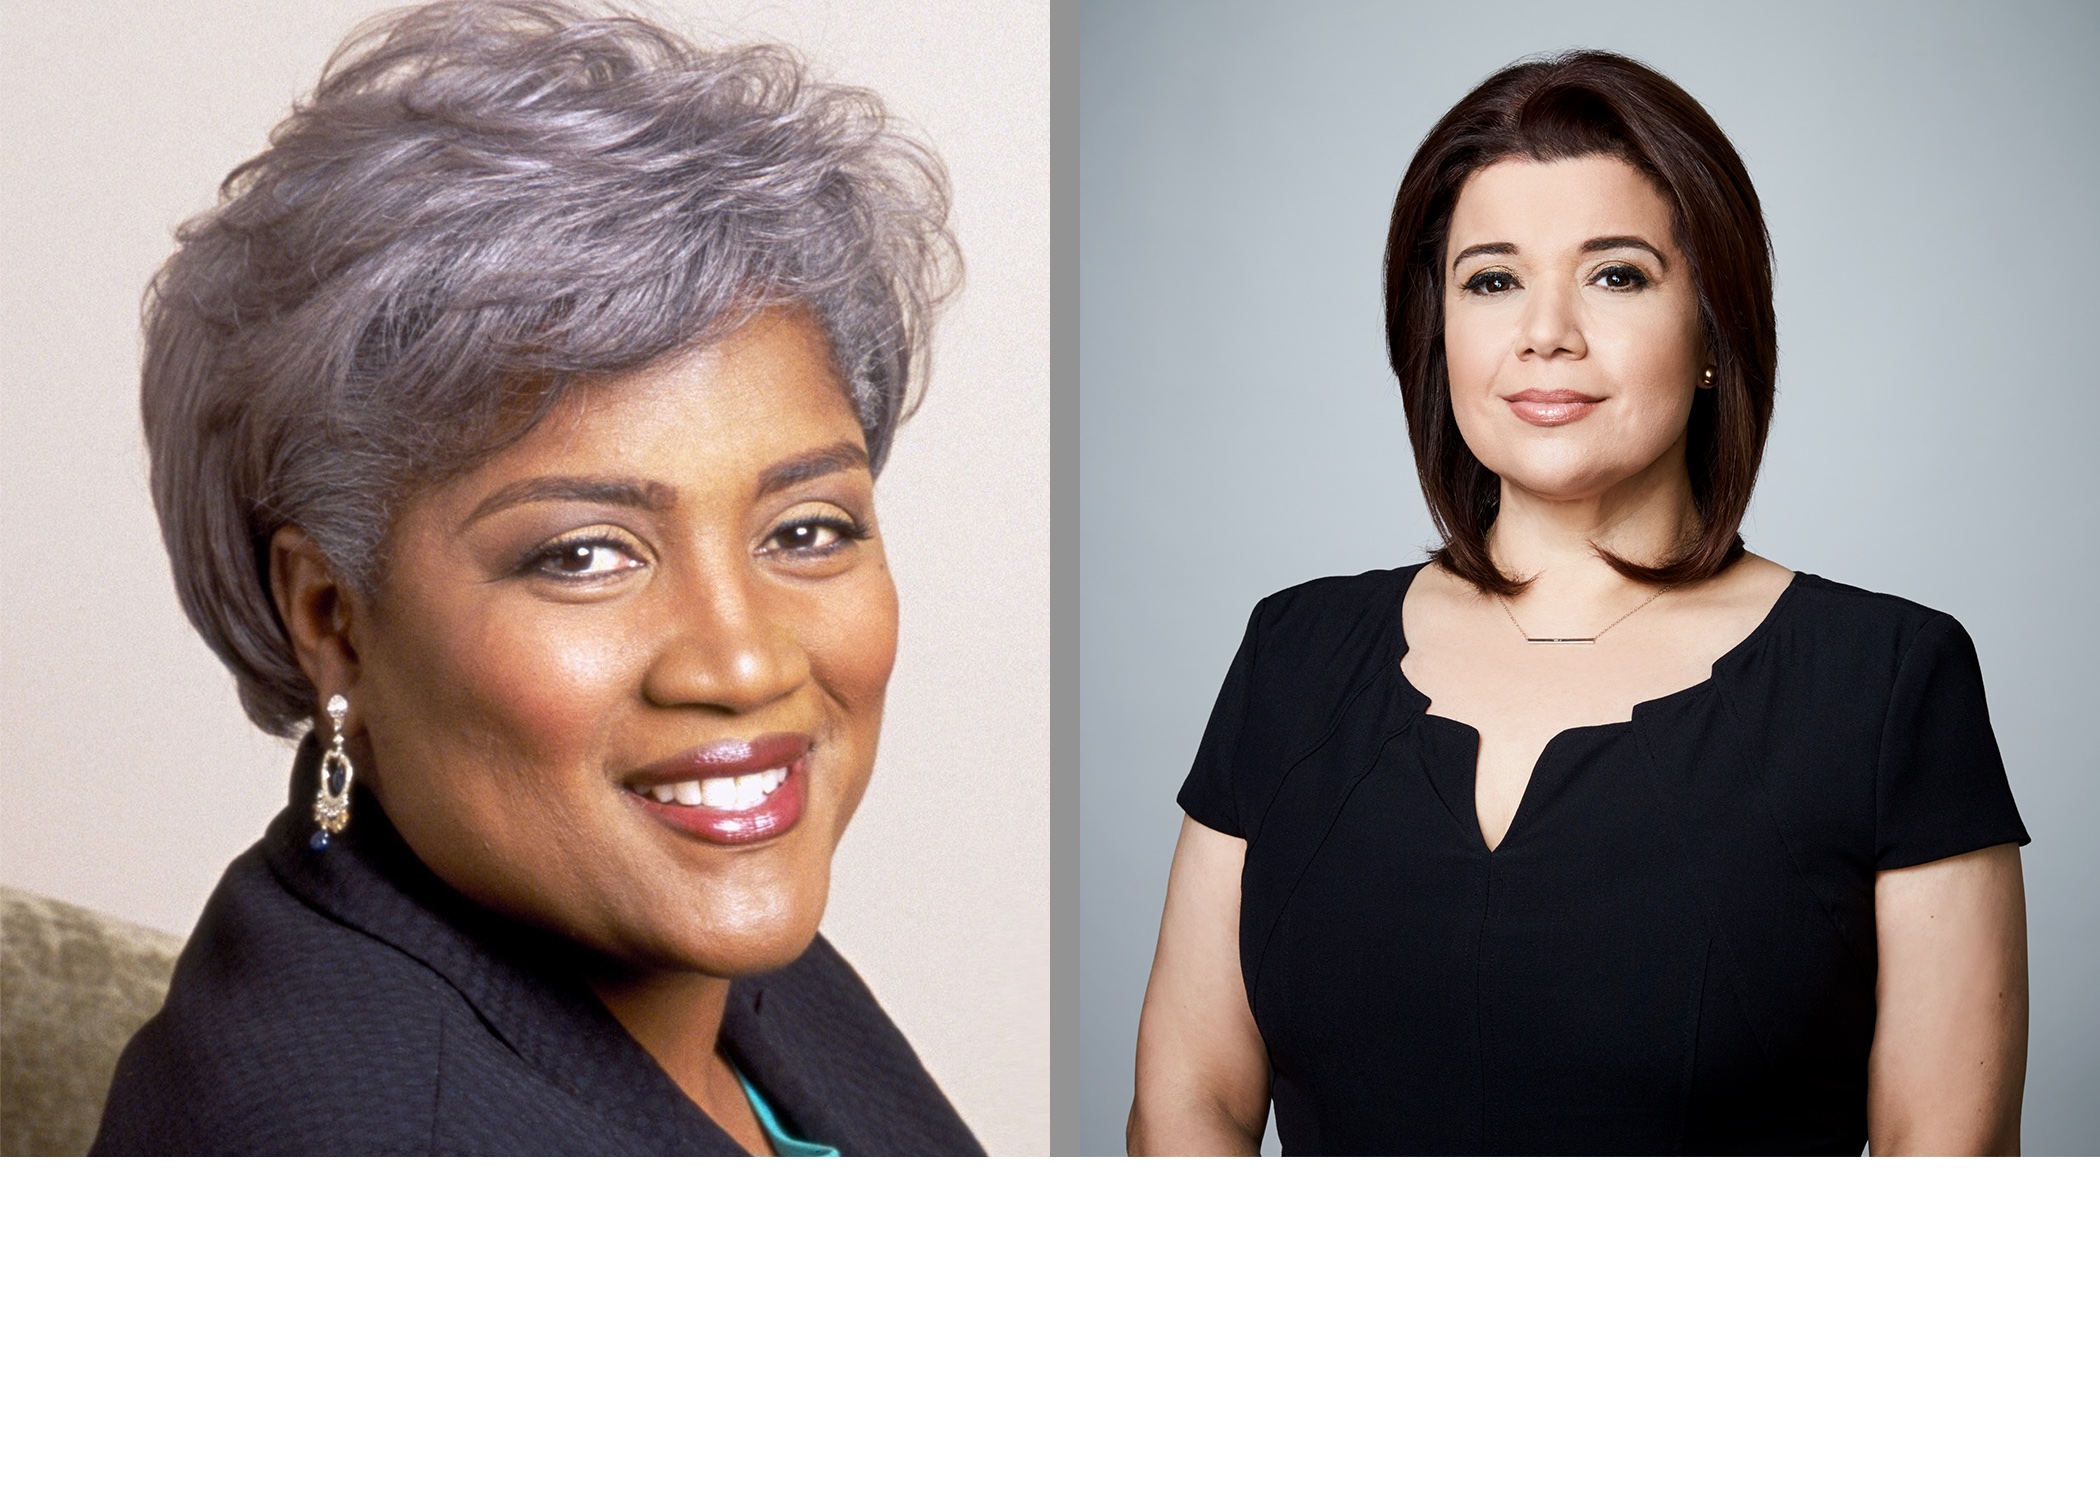 Tickets Available for Mount Union Schooler Lecture Featuring Political Strategists Brazile, Navarro